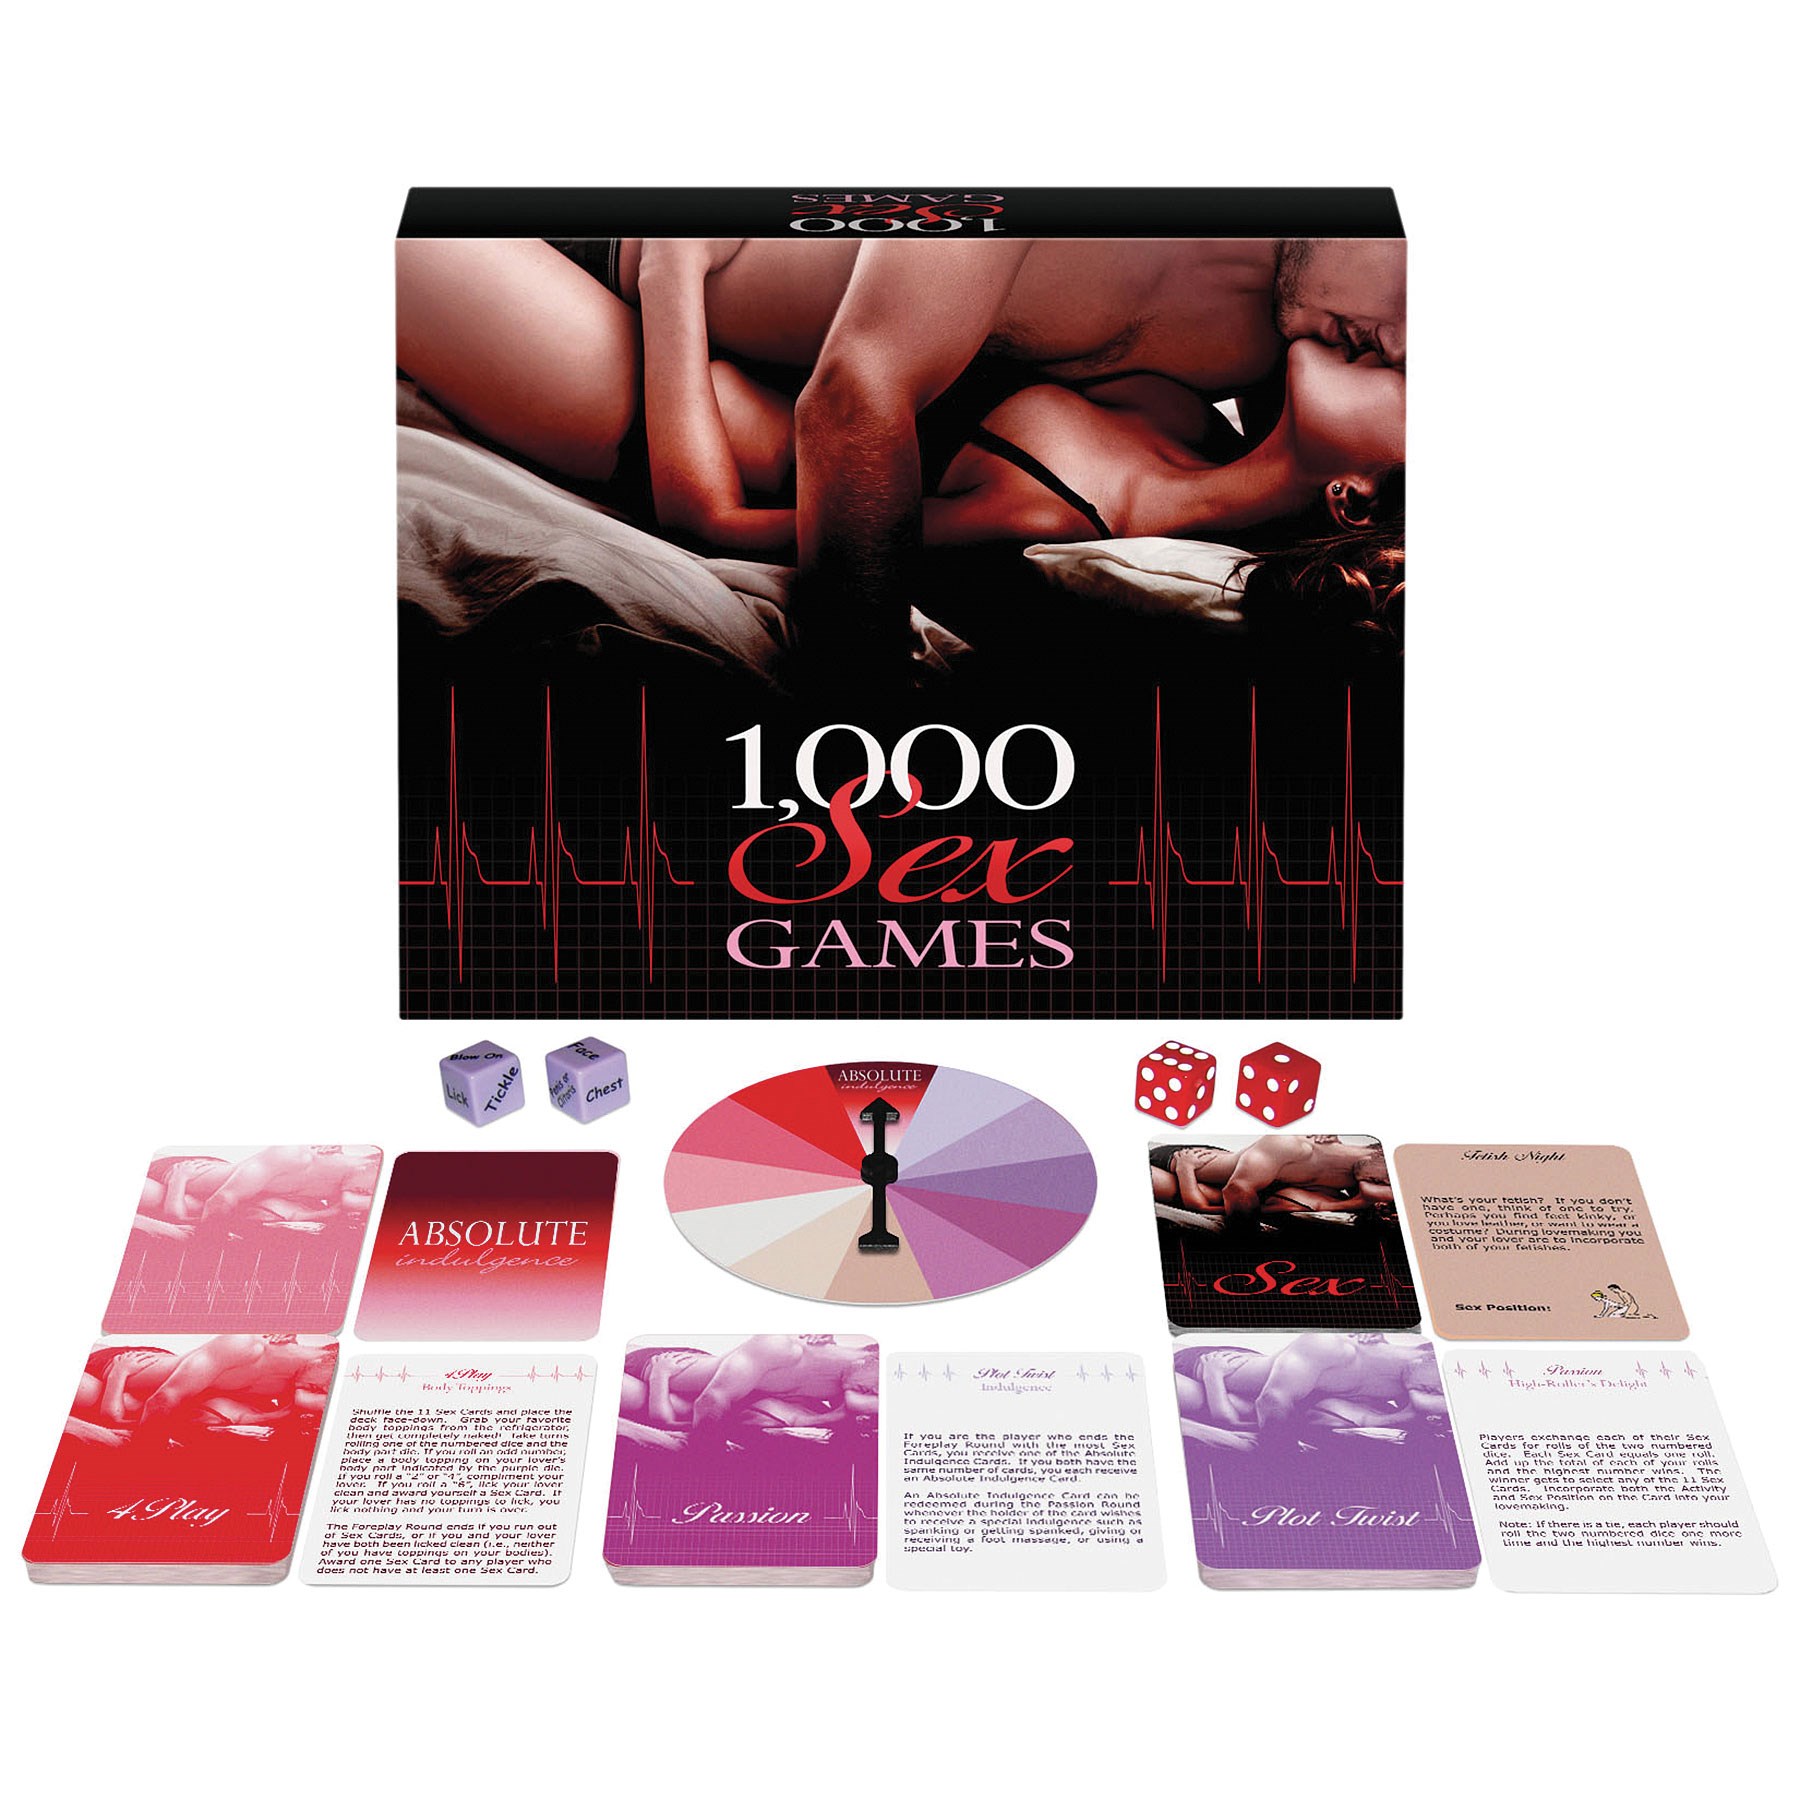 1000 Sex Games pieces on table